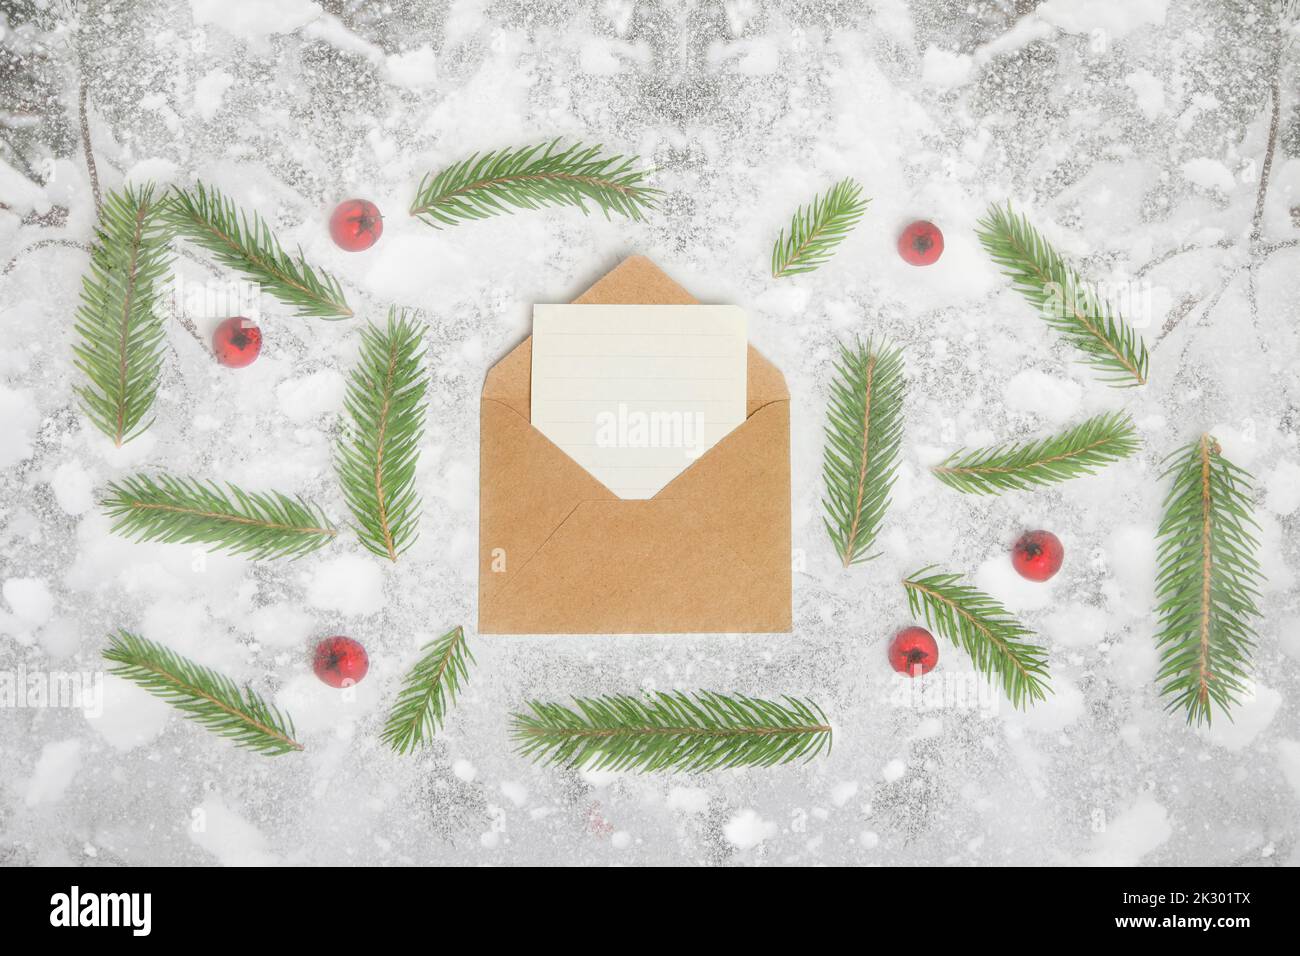 Defocus eco craft envelope, letter to Santa. Frame of fir branch or spruce branch and red berries on snowy background. Fir tree branches. Christmas gr Stock Photo